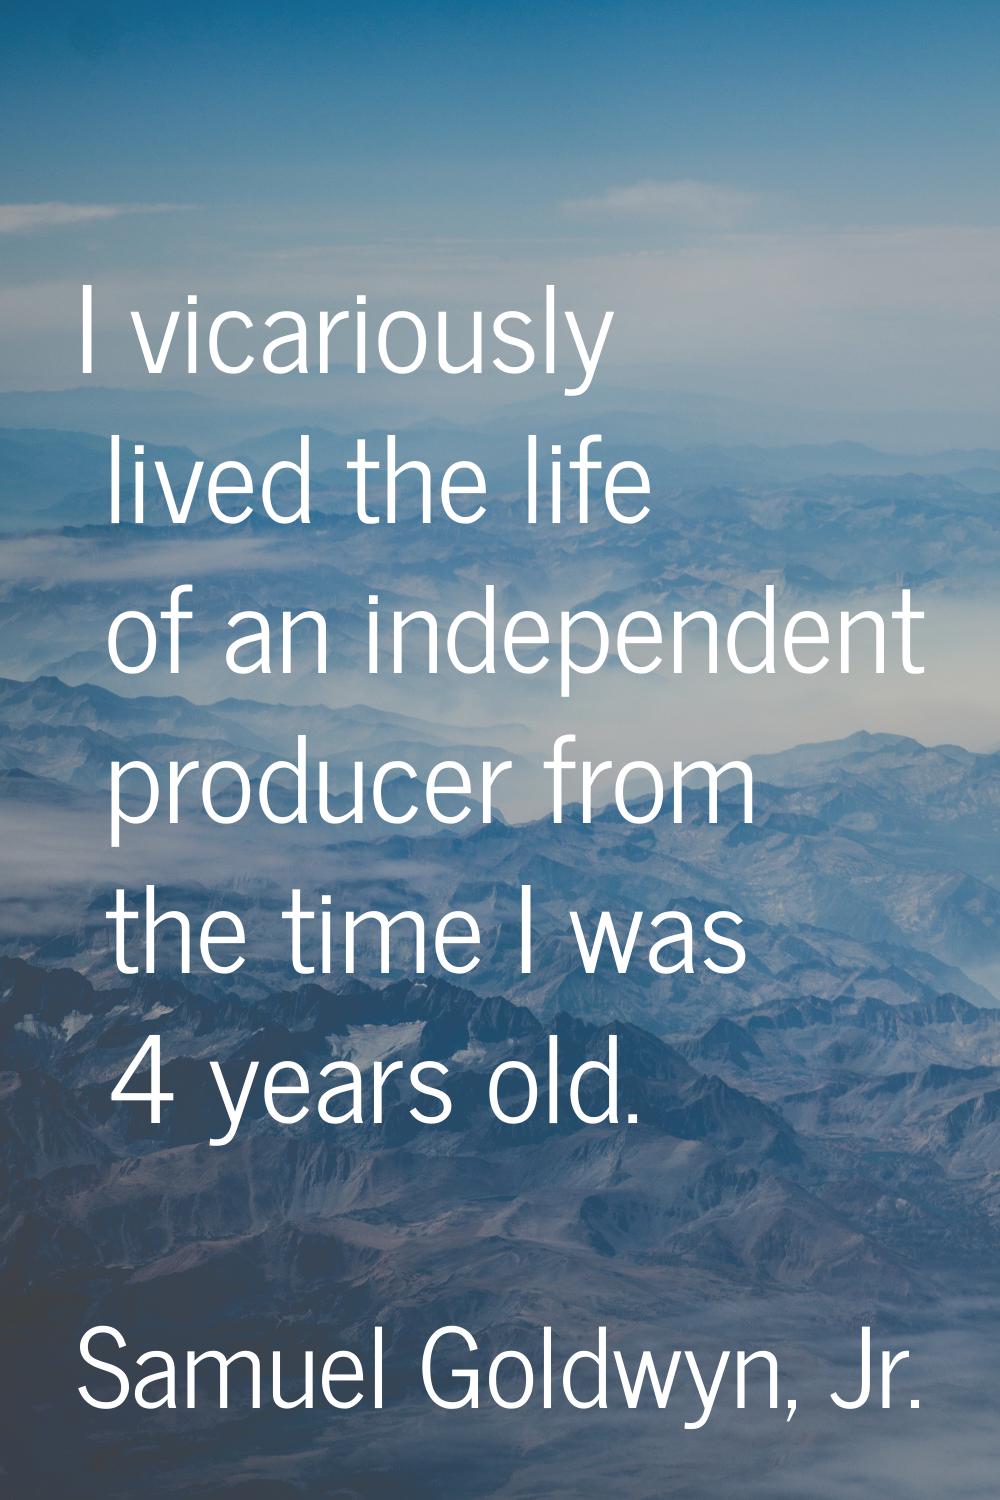 I vicariously lived the life of an independent producer from the time I was 4 years old.